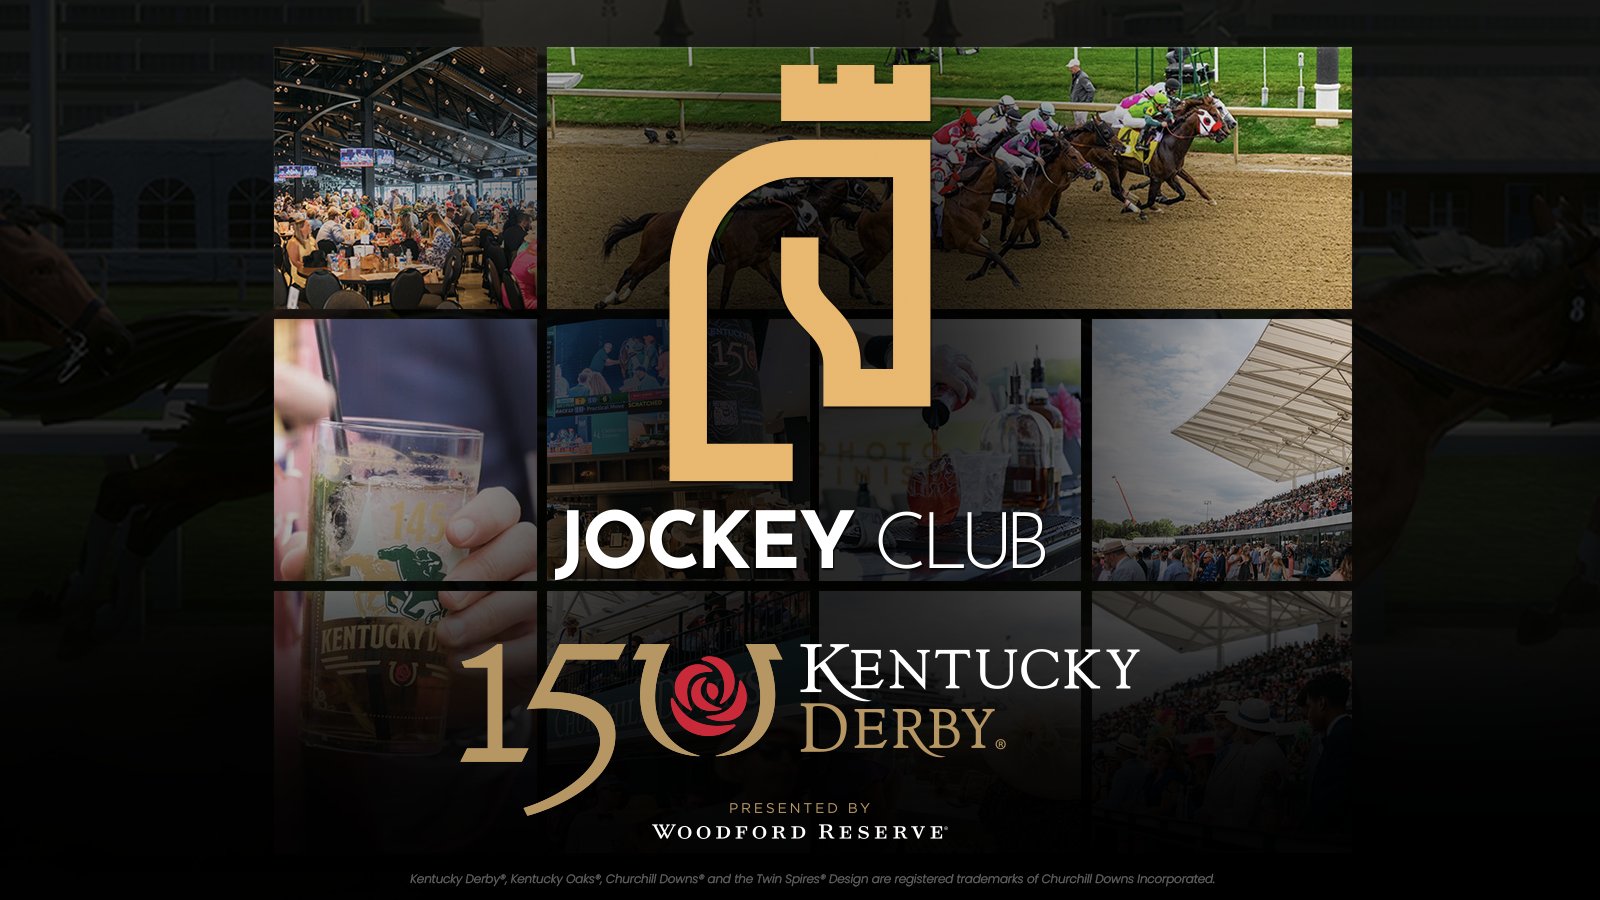 150 Days Until the 150th Kentucky Derby: PFJC Members Ready For an Unforgettable Experience